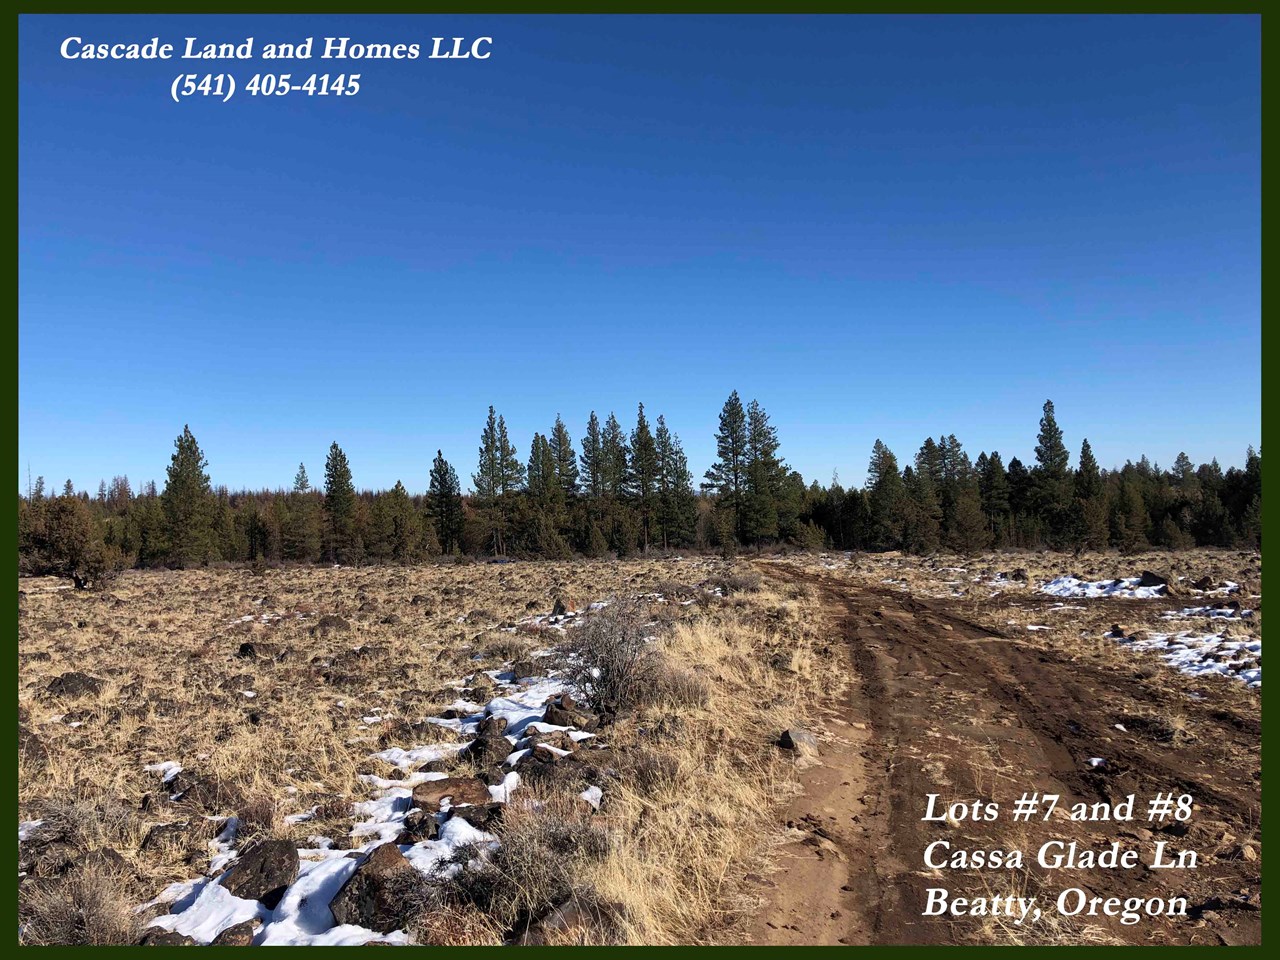 we did not have any trouble accessing the property. it would be best if you had a high-profile vehicle, as with all rural properties. the roads are compacted dirt and the area is primarily volcanic.